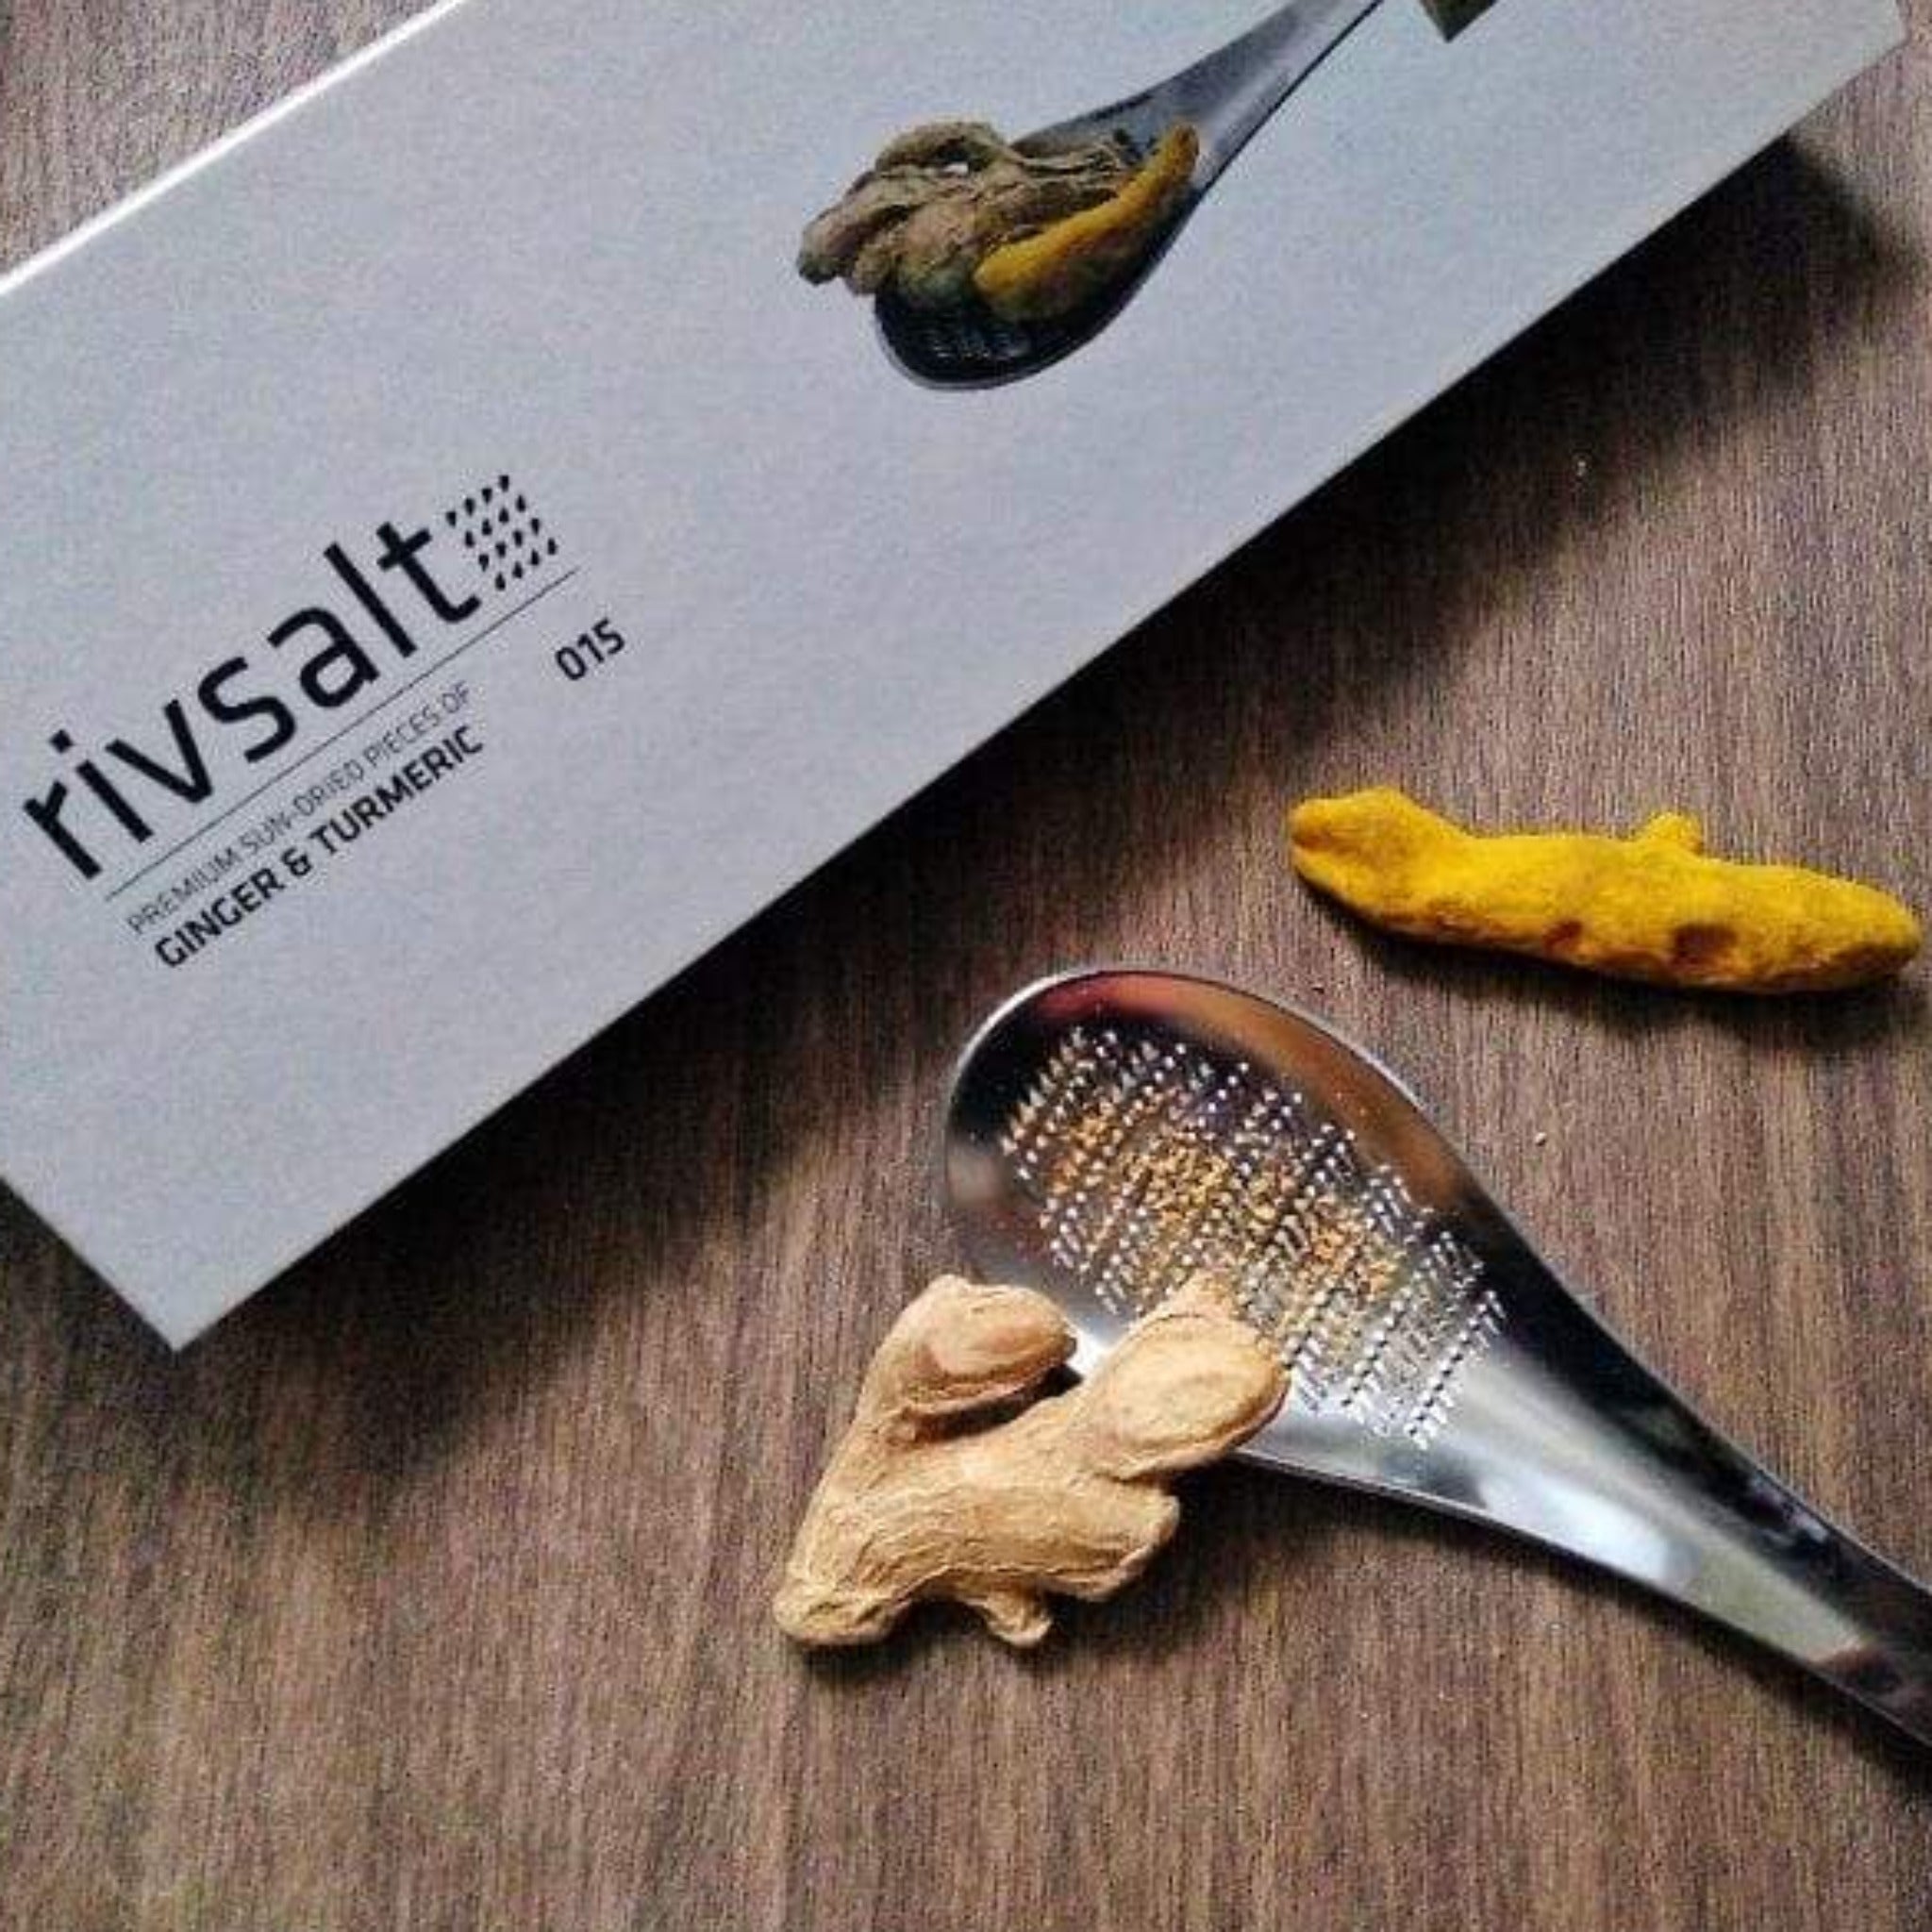 015 GINGER & TURMERIC - stainless steel grater. stand in natural oak. premium sun-dried roots. sleek flat gift pack.